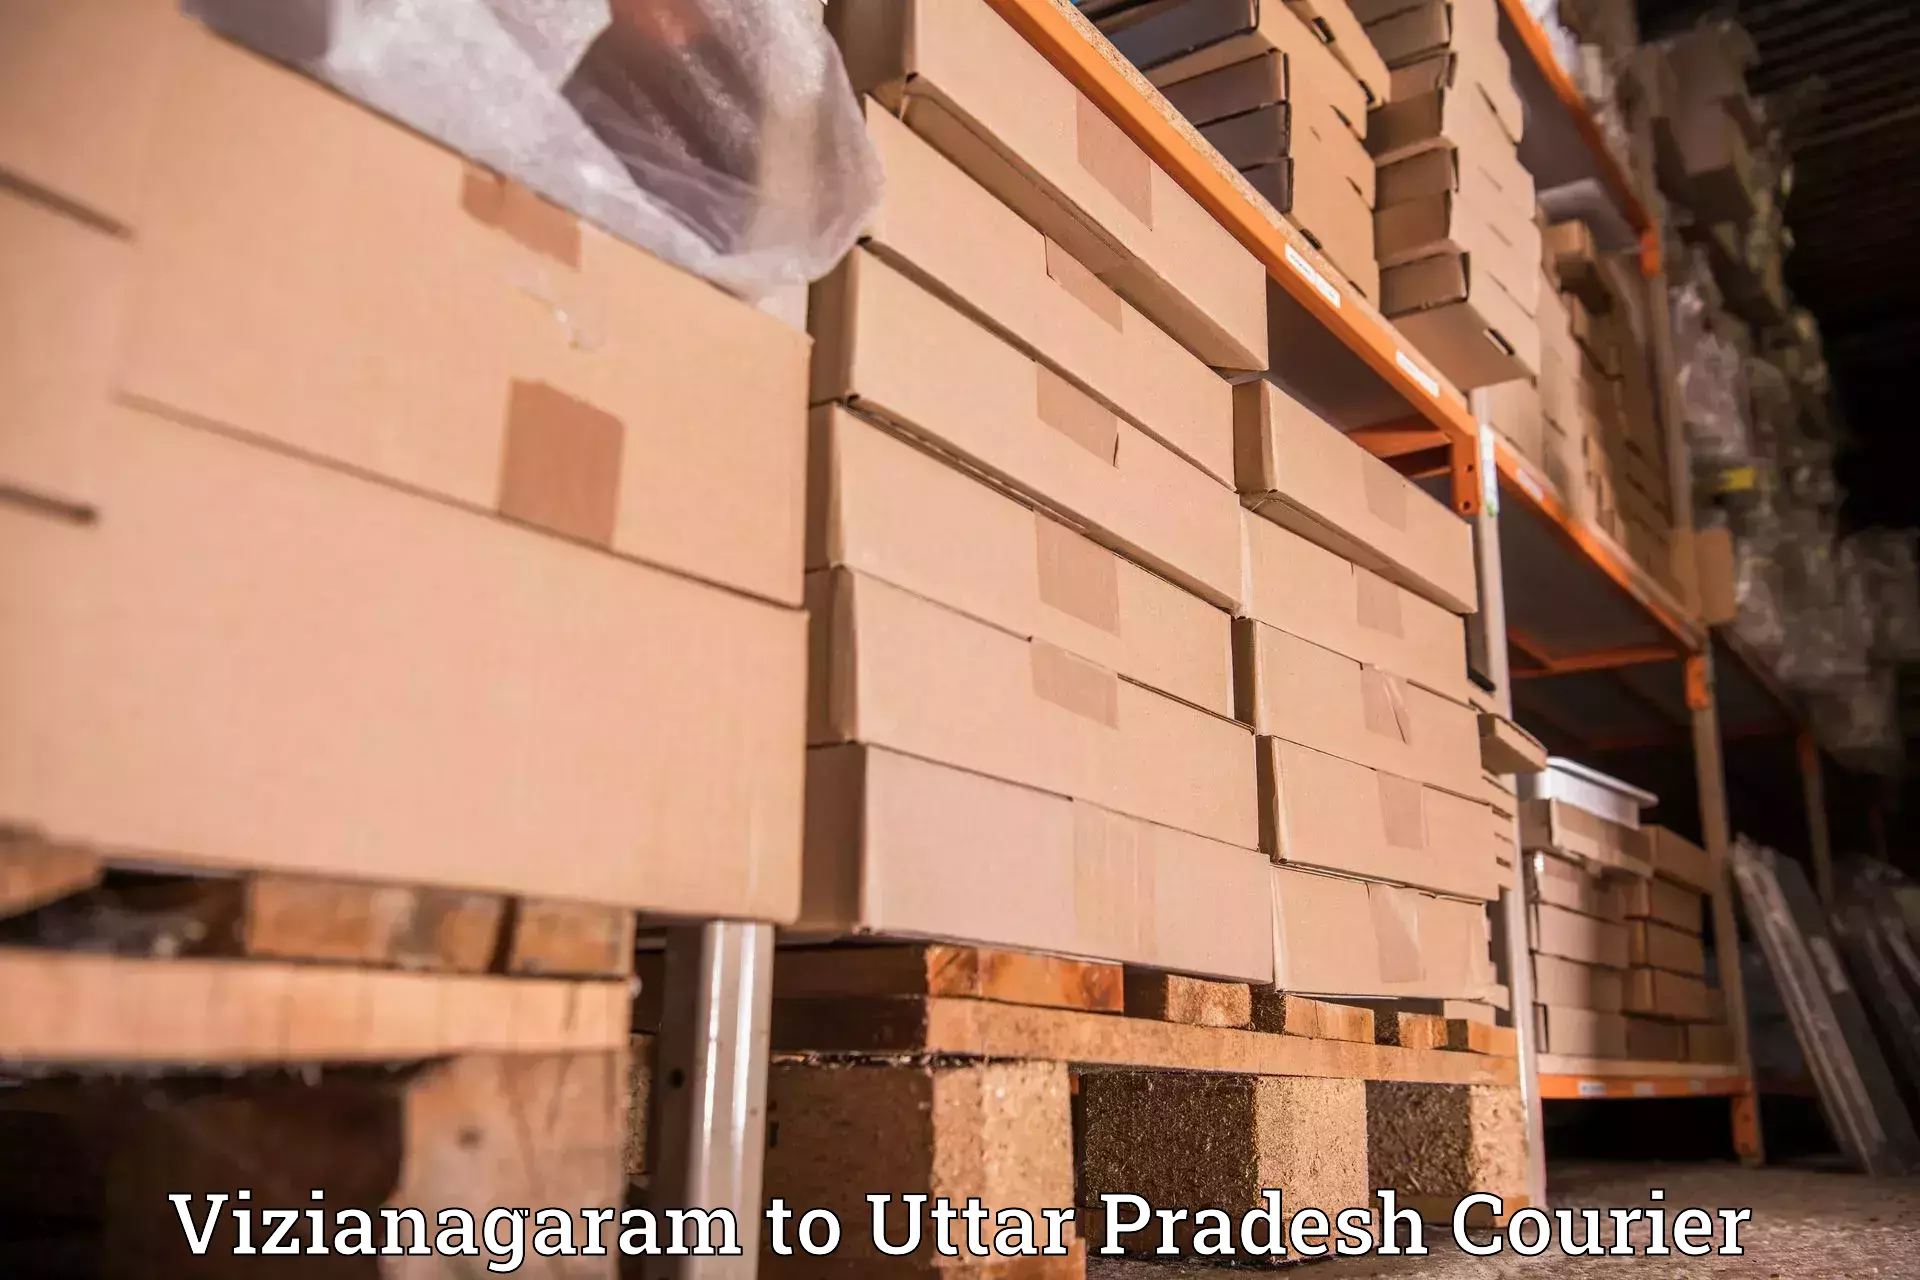 Reliable parcel services in Vizianagaram to Kanth